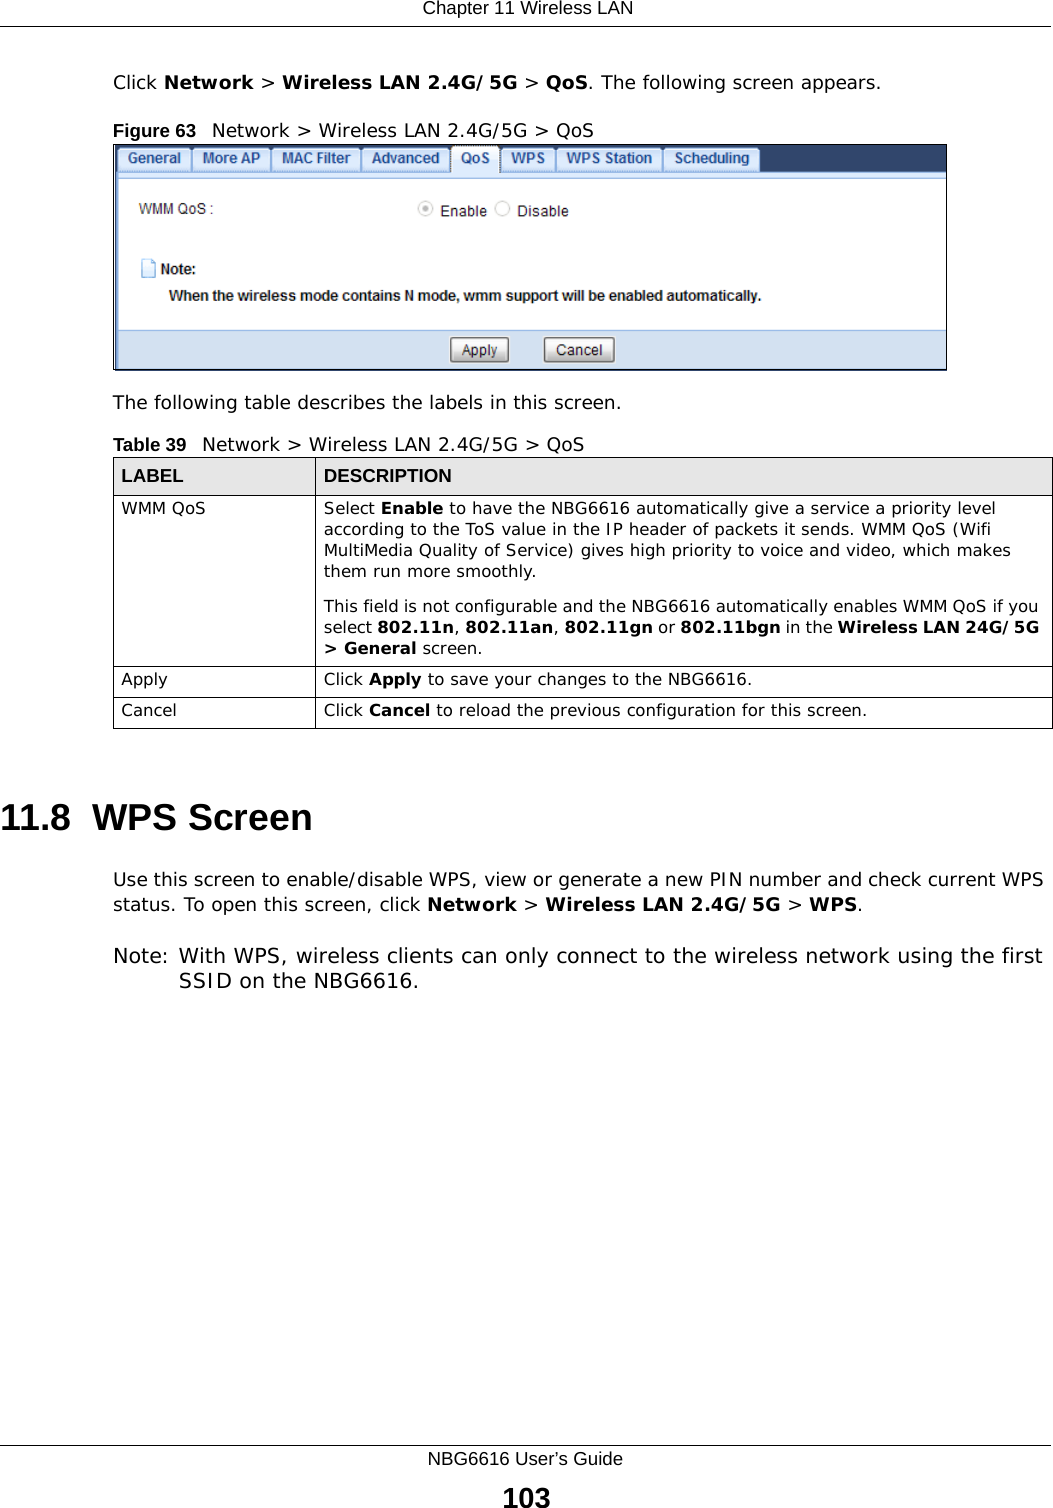  Chapter 11 Wireless LANNBG6616 User’s Guide103Click Network &gt; Wireless LAN 2.4G/5G &gt; QoS. The following screen appears.Figure 63   Network &gt; Wireless LAN 2.4G/5G &gt; QoS The following table describes the labels in this screen. 11.8  WPS ScreenUse this screen to enable/disable WPS, view or generate a new PIN number and check current WPS status. To open this screen, click Network &gt; Wireless LAN 2.4G/5G &gt; WPS.Note: With WPS, wireless clients can only connect to the wireless network using the first SSID on the NBG6616.Table 39   Network &gt; Wireless LAN 2.4G/5G &gt; QoSLABEL DESCRIPTIONWMM QoS Select Enable to have the NBG6616 automatically give a service a priority level according to the ToS value in the IP header of packets it sends. WMM QoS (Wifi MultiMedia Quality of Service) gives high priority to voice and video, which makes them run more smoothly.This field is not configurable and the NBG6616 automatically enables WMM QoS if you select 802.11n, 802.11an, 802.11gn or 802.11bgn in the Wireless LAN 24G/5G &gt; General screen.Apply Click Apply to save your changes to the NBG6616.Cancel Click Cancel to reload the previous configuration for this screen.